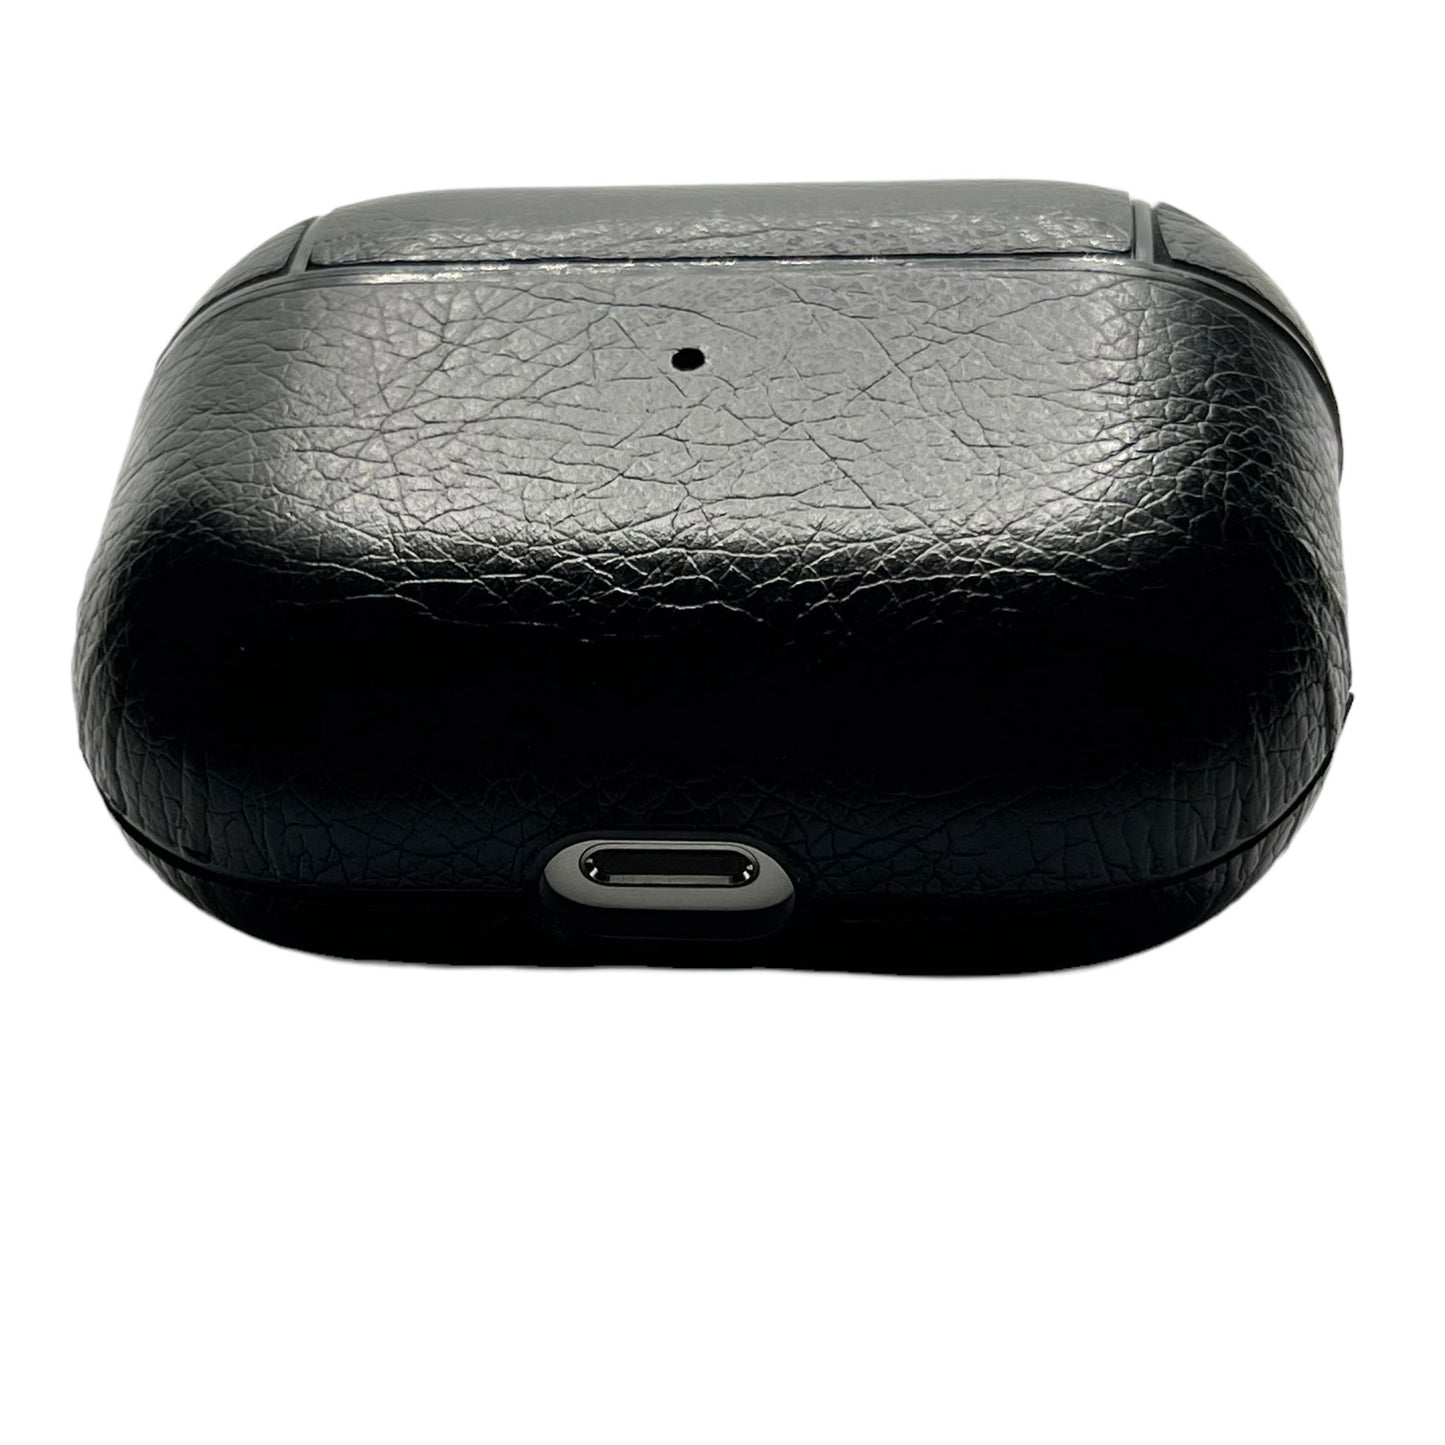 JenDore Black Leather Protective Carrying Pouch Case Cover with Keychain for AirPods Pro